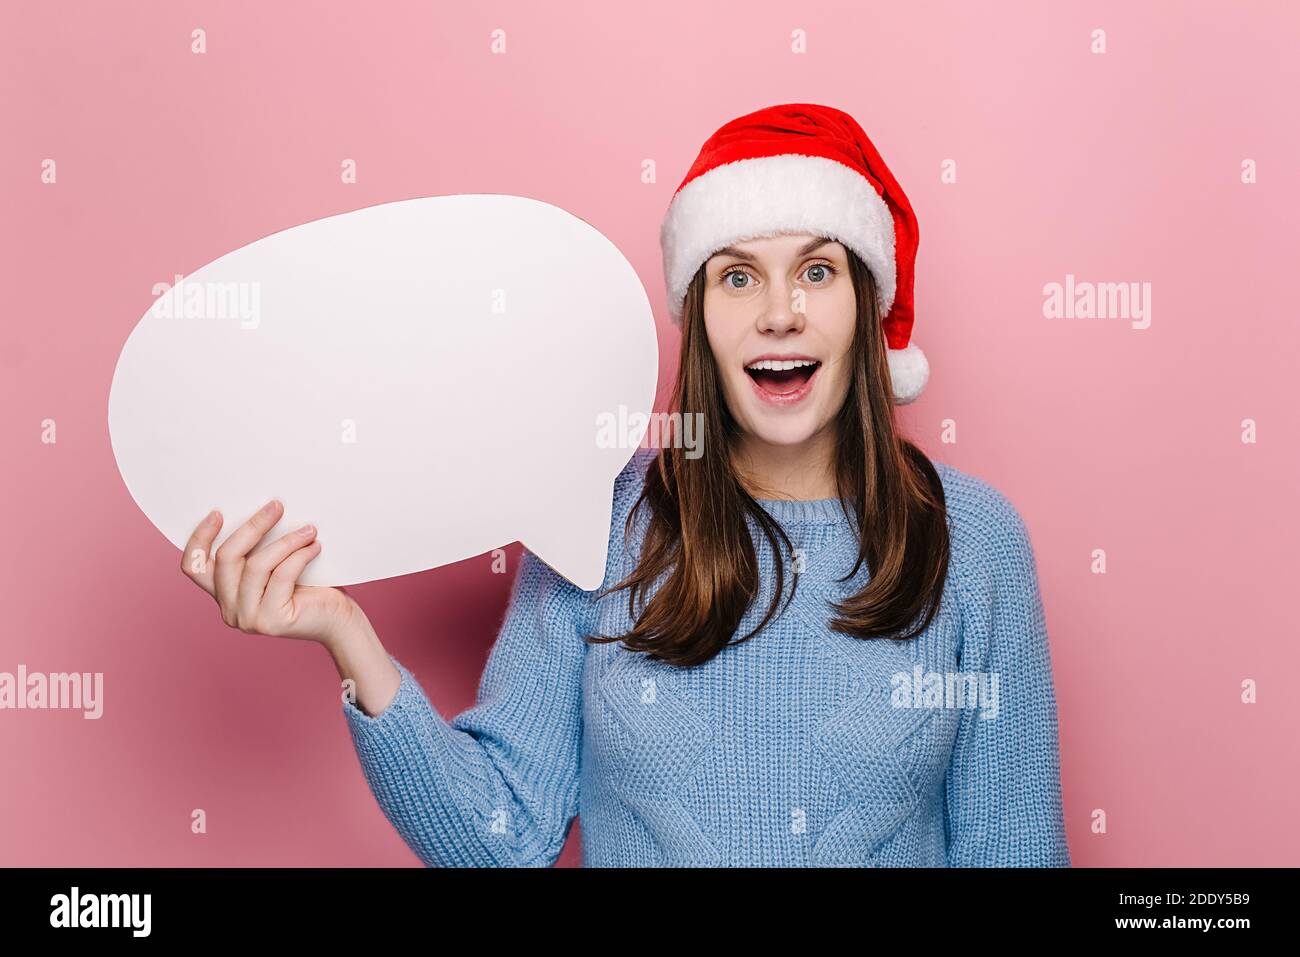 Happy shocked young woman holding blank speech bubble, dressed in Christmas red hat and cozy blue sweater, models over pink studio background Stock Photo